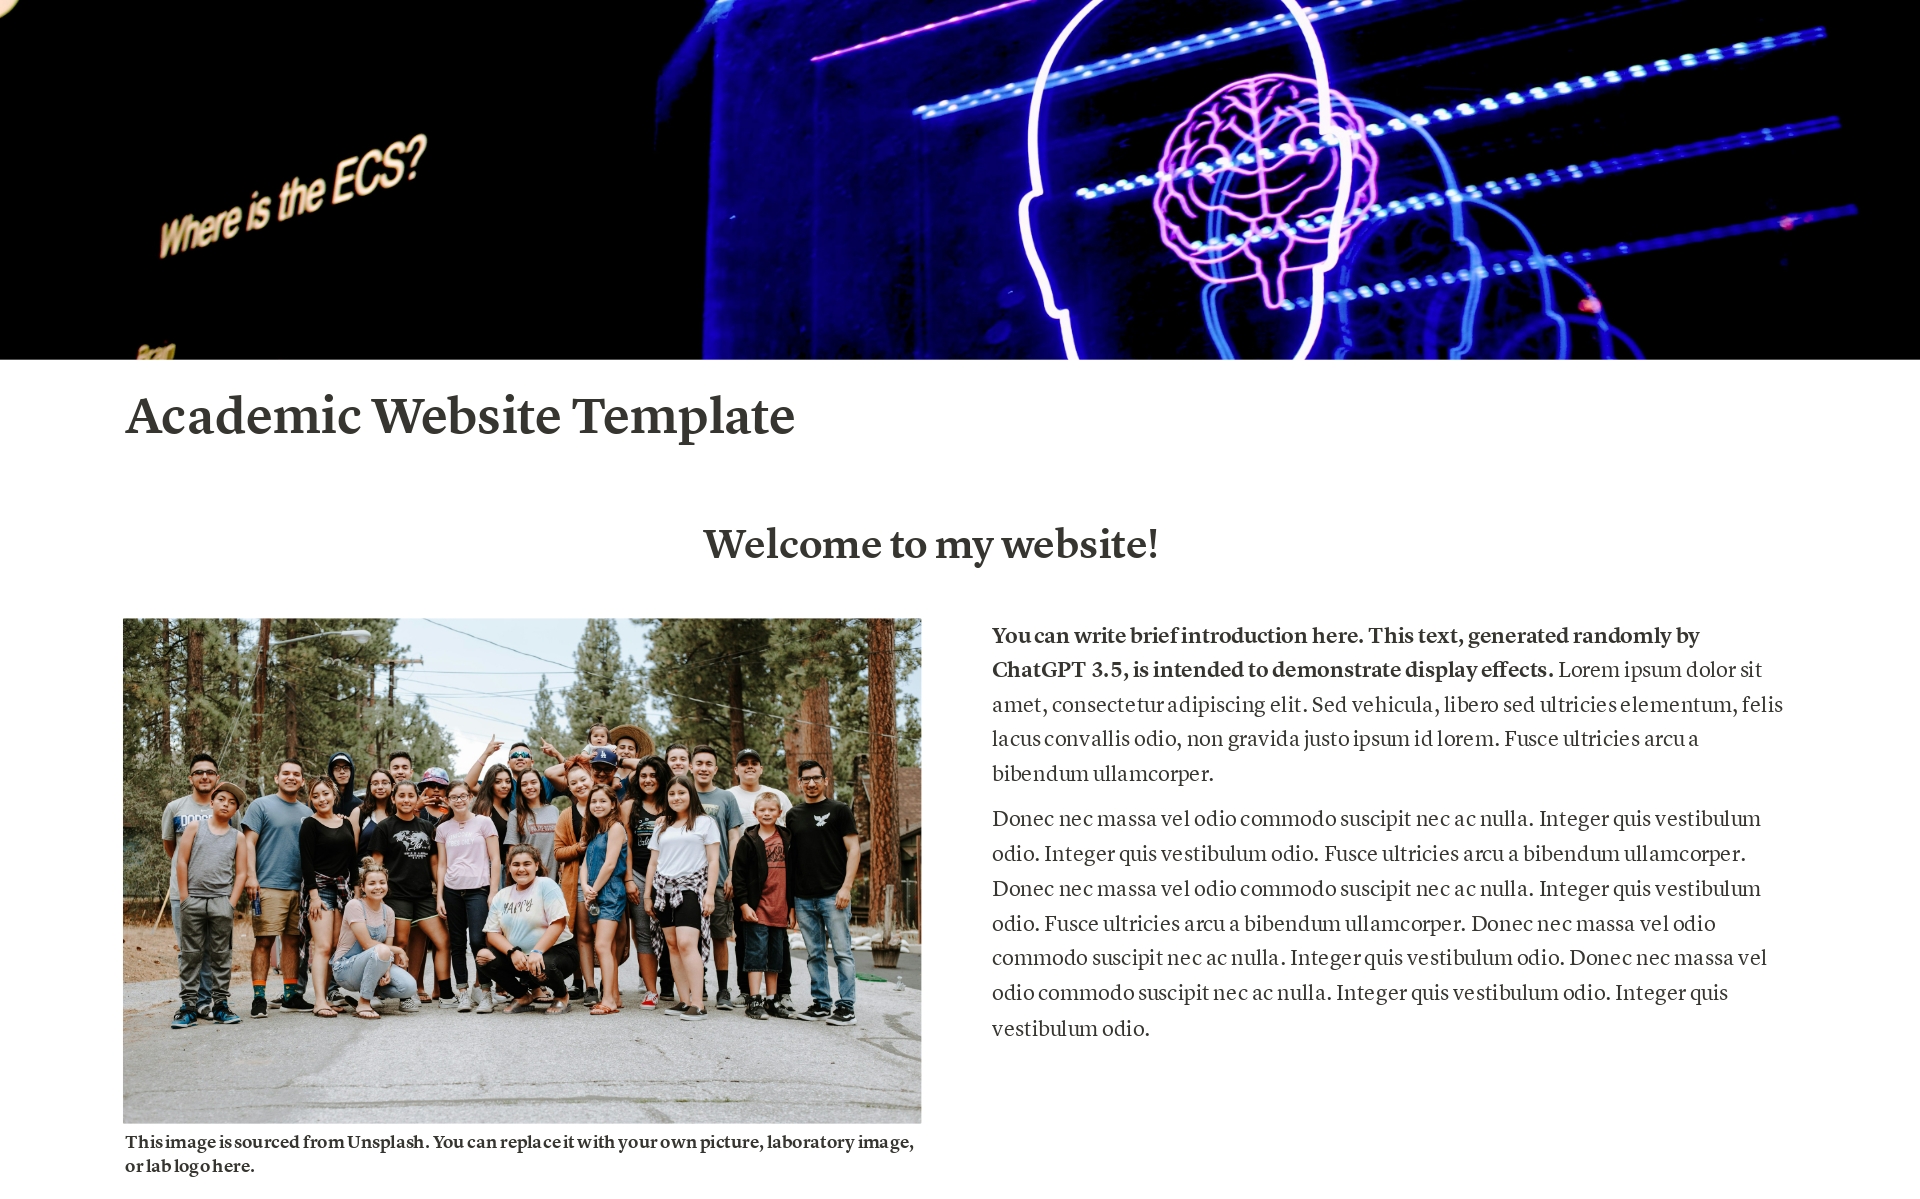 This is an Academic Template Website built by Notion.